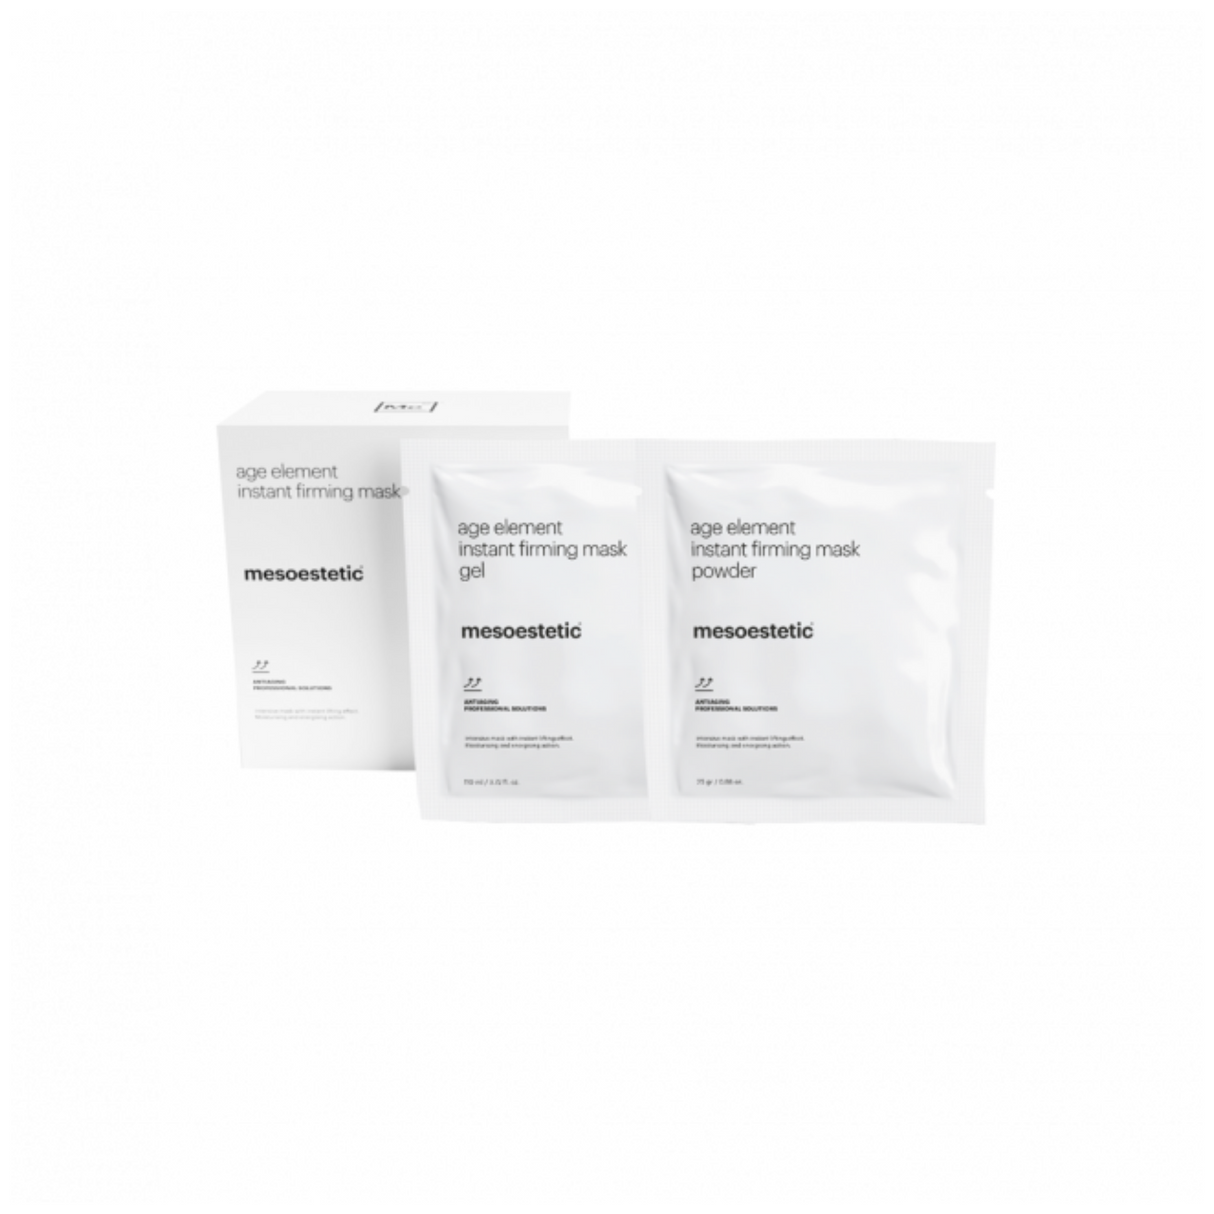 age element firming mask | Mask with immediate lifting effect | 5 pcs.